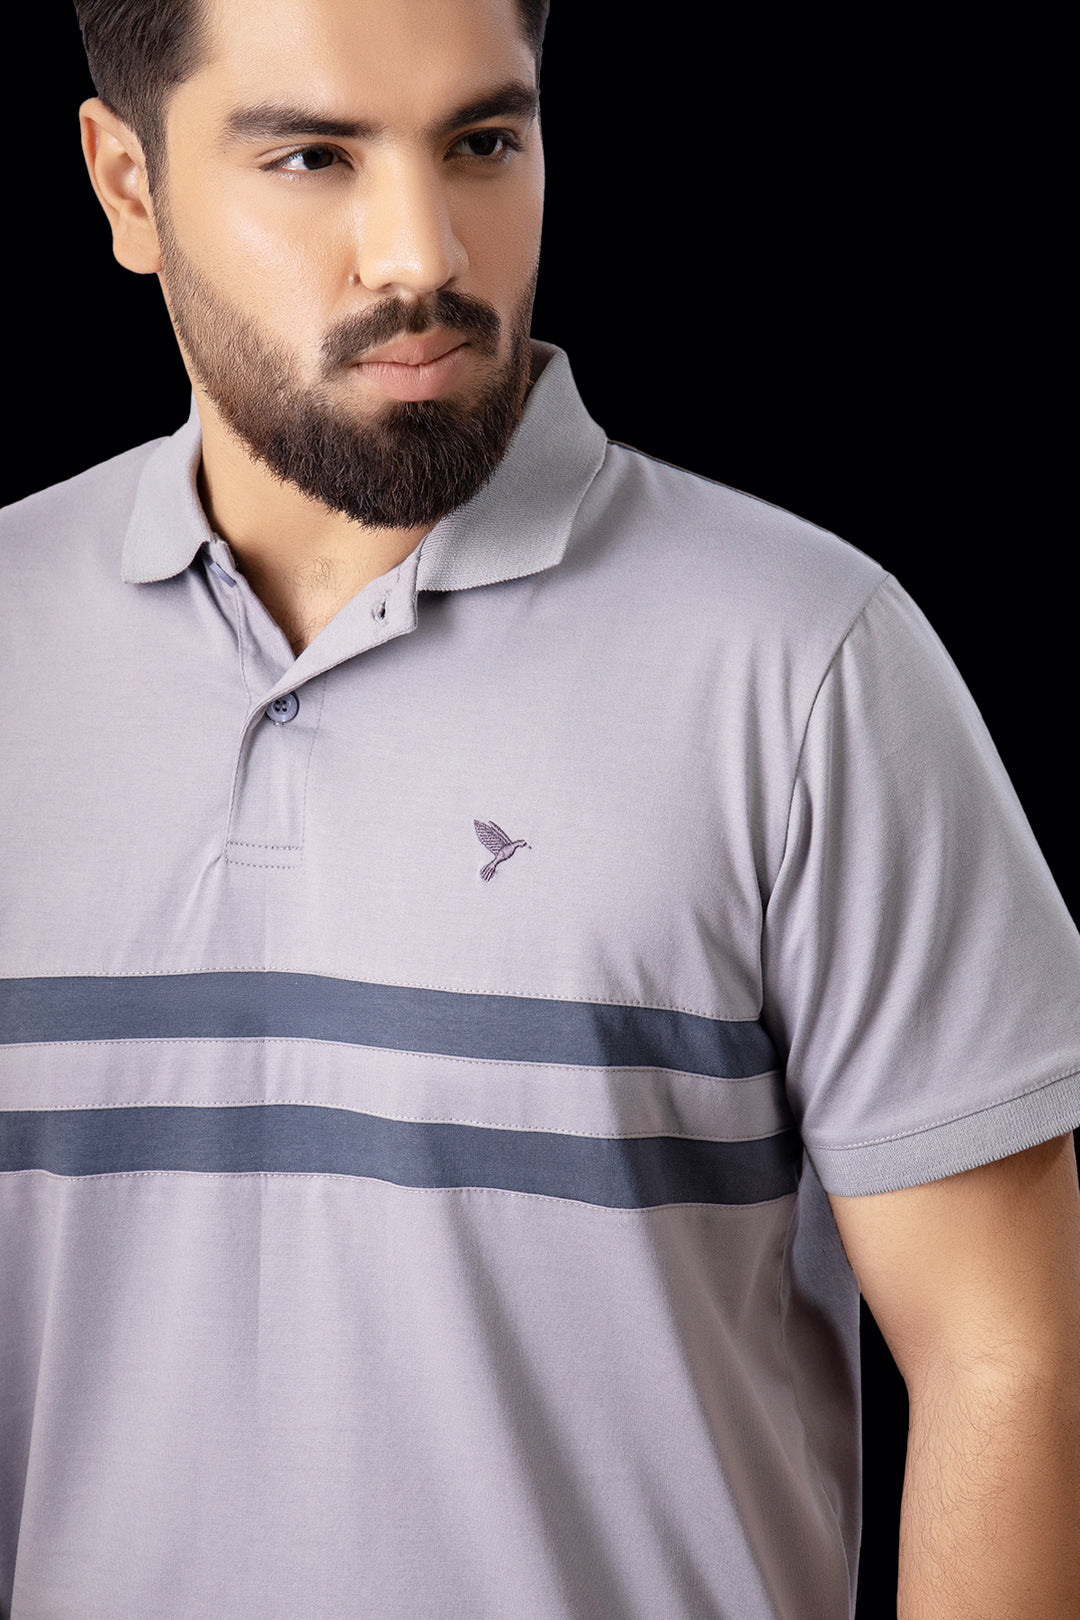 Grey Contrast Panelled Embroidered Polo Shirt (Plus Size) - A23 - MP0209P